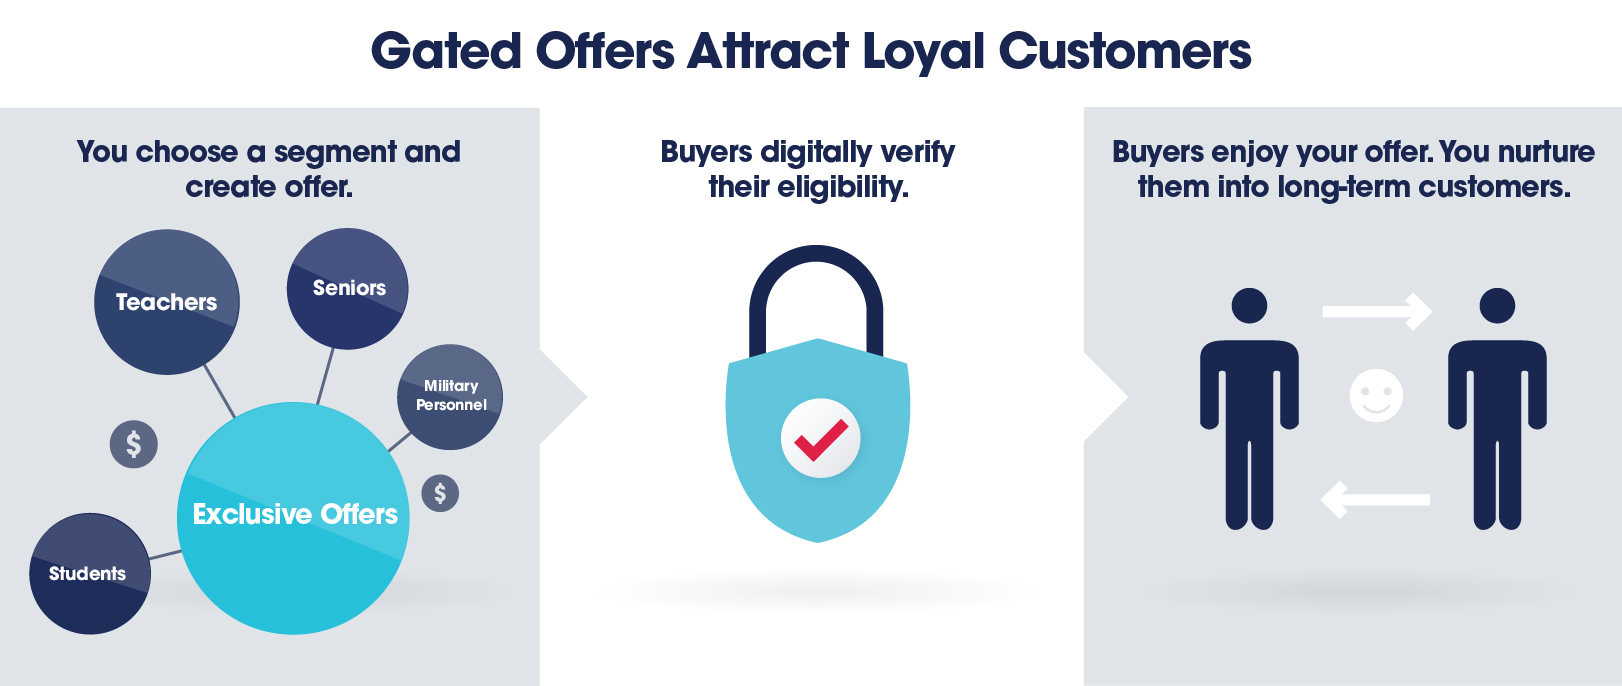 Gated offers attract loyal customers. You choose a segment and create an offer. Buyers digitally verify their eligibility. Buyers enjoy your offer. You nurture them into long-term customers.